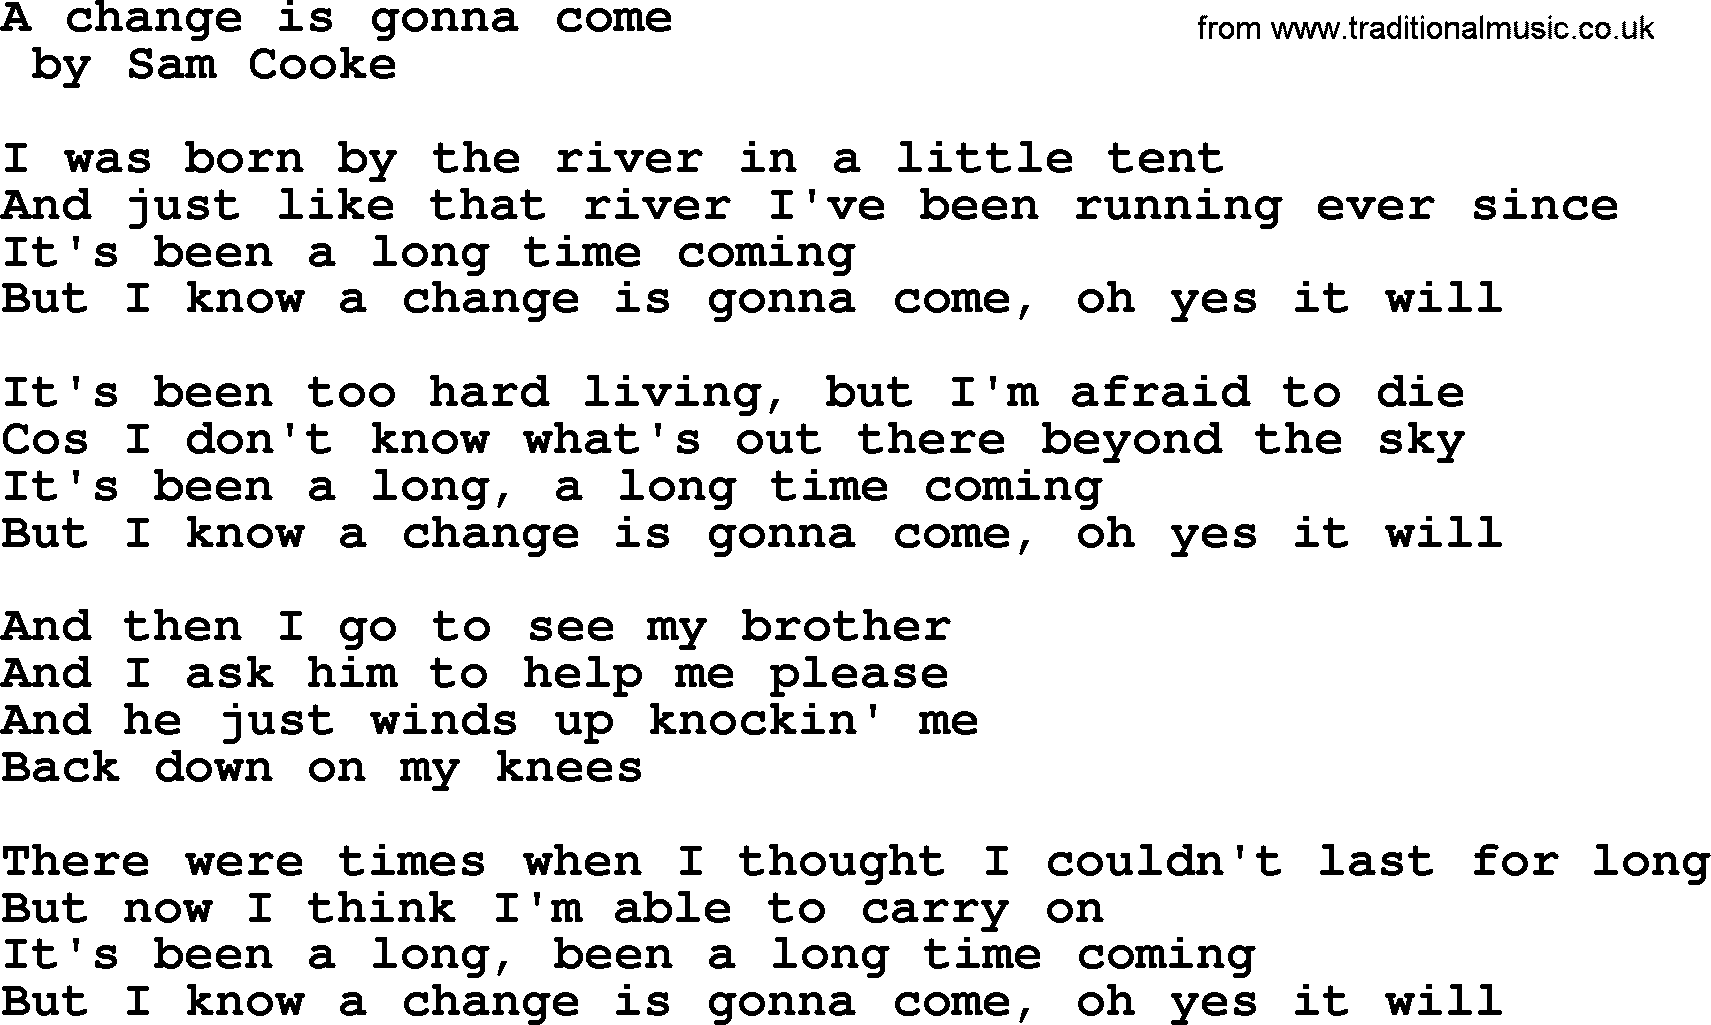 Bruce Springsteen song: A Change Is Gonna Come lyrics